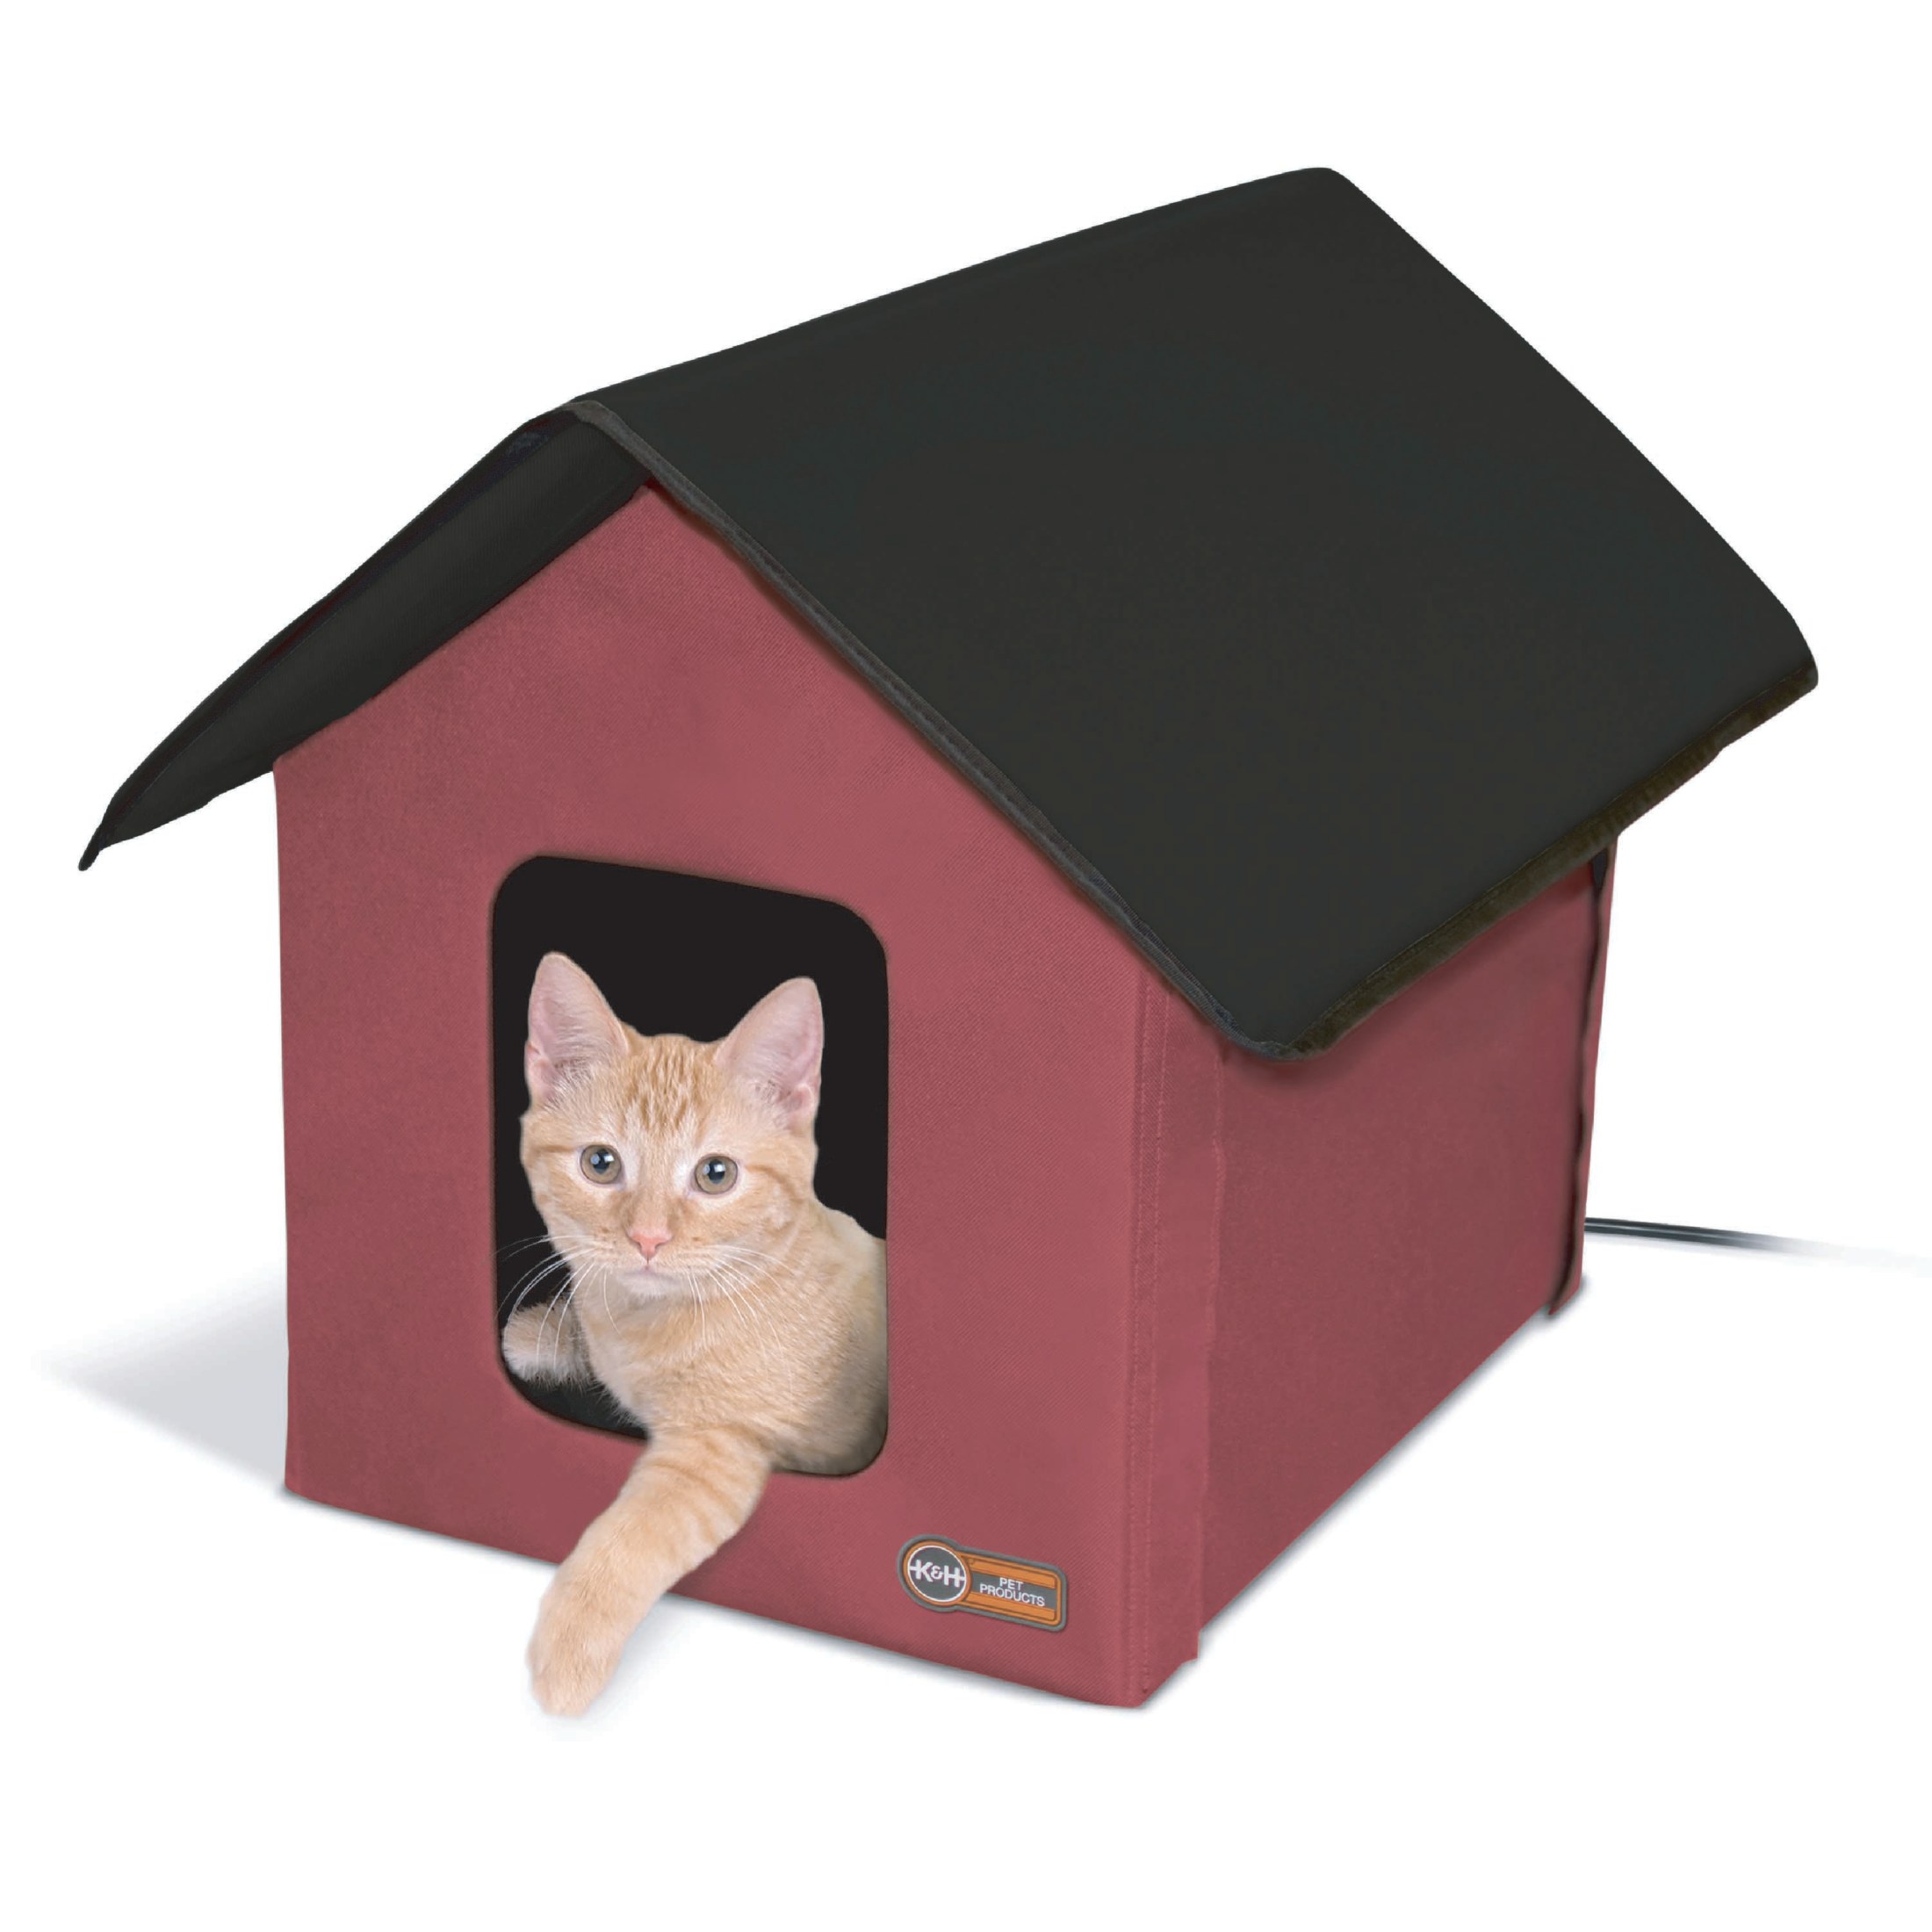 K&H Pet Products Outdoor Heated Kitty House Cat Shelter Red/Black 19 X 22 X 17 Inches - image 1 of 10